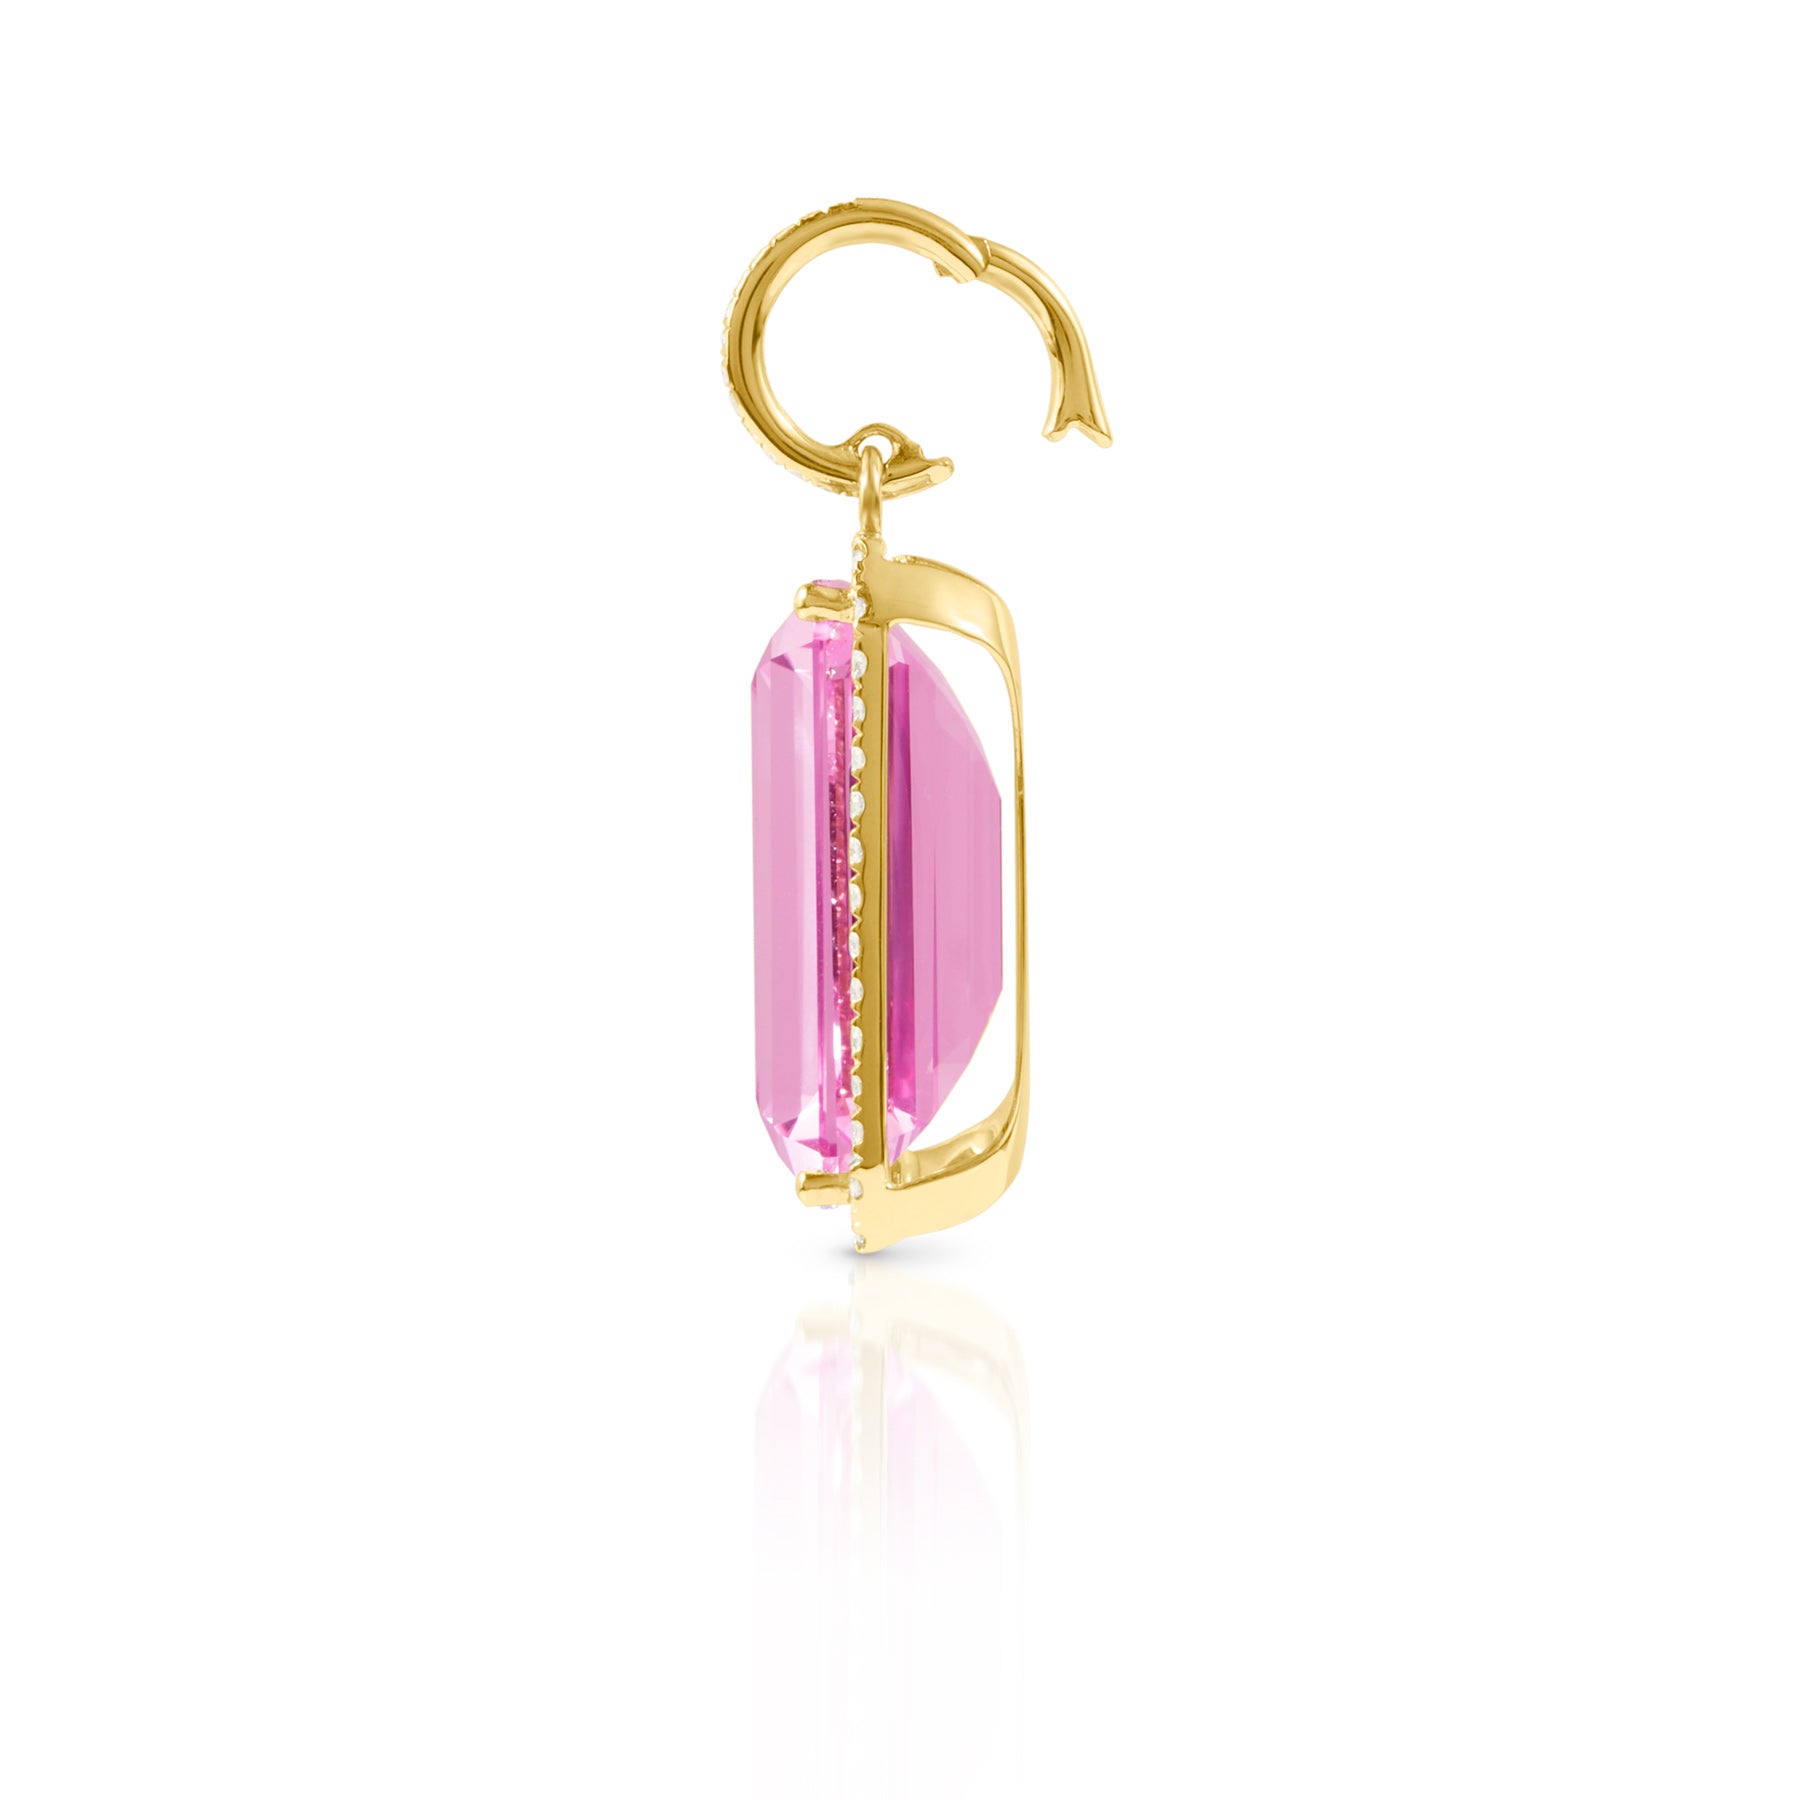 18KT Yellow Gold Diamond Pink Topaz Luxe Jolly Charm Pendant with Diamond Clip on Bail